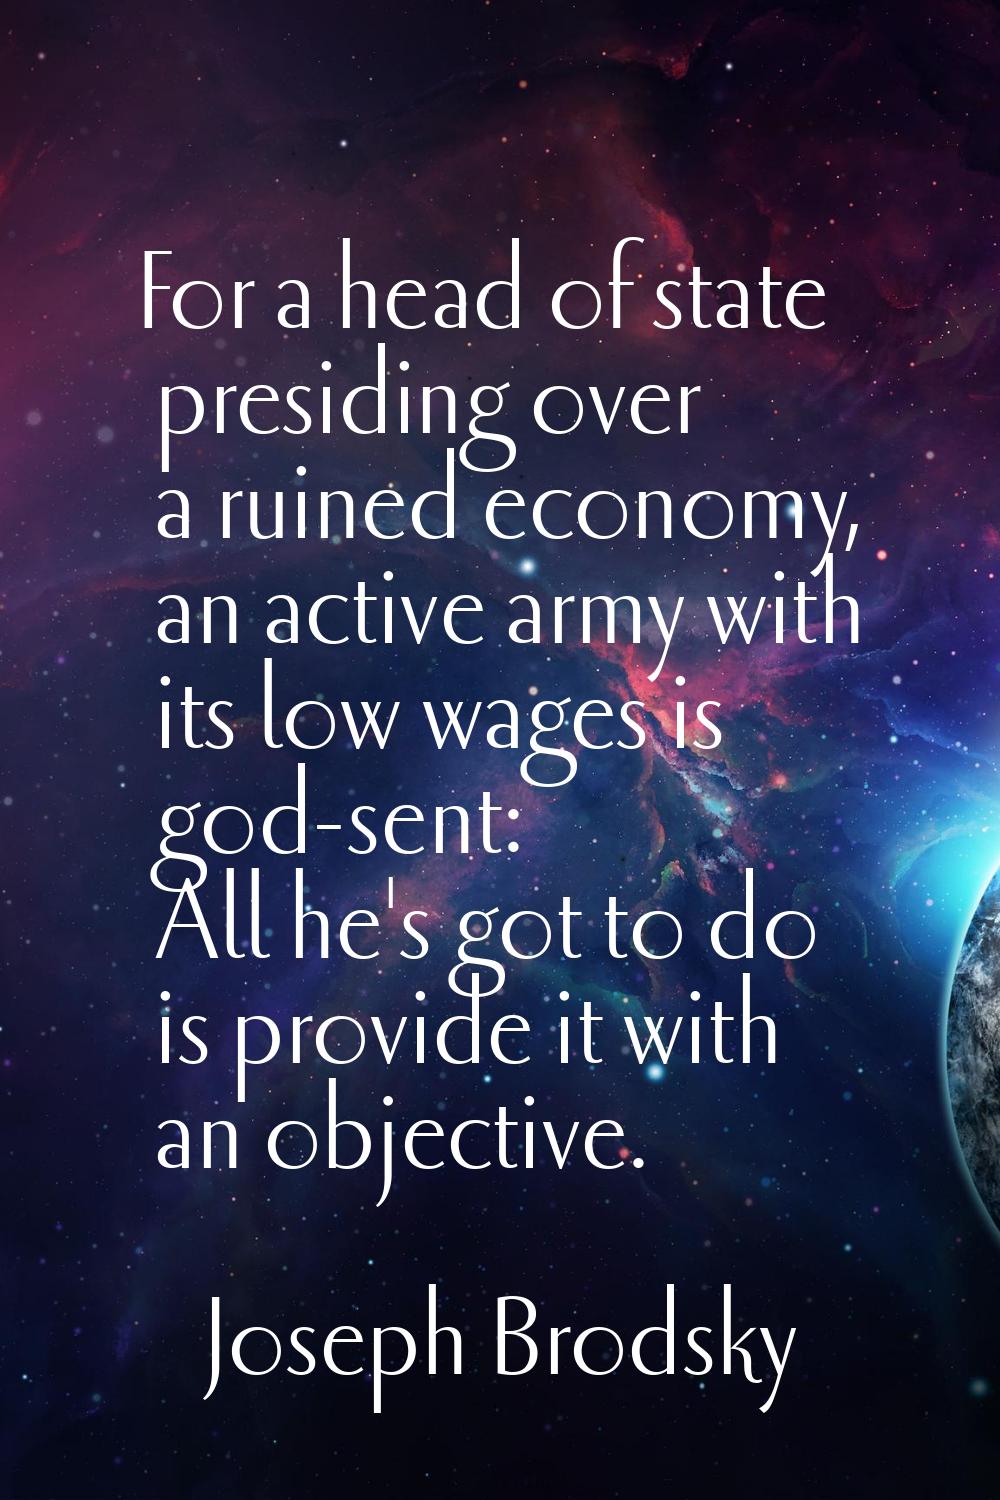 For a head of state presiding over a ruined economy, an active army with its low wages is god-sent: